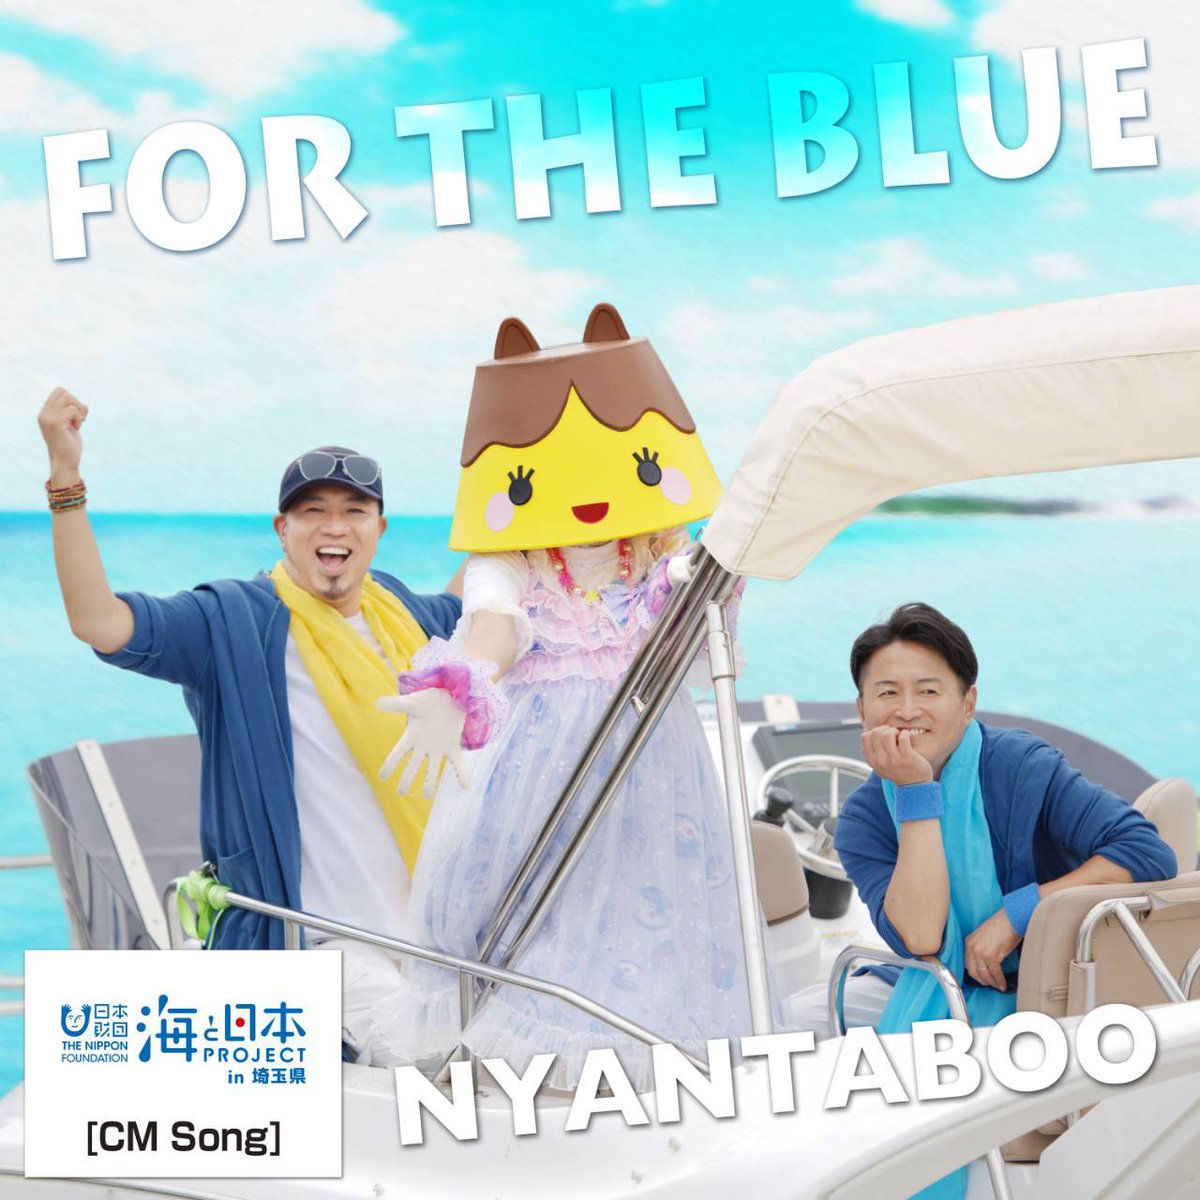 youtu.be/bkHfXQRLwiA

海と日本プロジェクトin埼玉県

テレ玉CMソング

にゃんたぶぅ 『FOR THE BLUE』

8月17日 昼12時にプレミア公開✨

LinkCore：
linkco.re/MCQv8vZ1
 
＃にゃんたぶぅ
＃海と日本プロジェクト
＃テレ玉
＃CMソング
＃たくまん
＃もりちぃ
＃にゃんプリン
#FORTHEBLUE